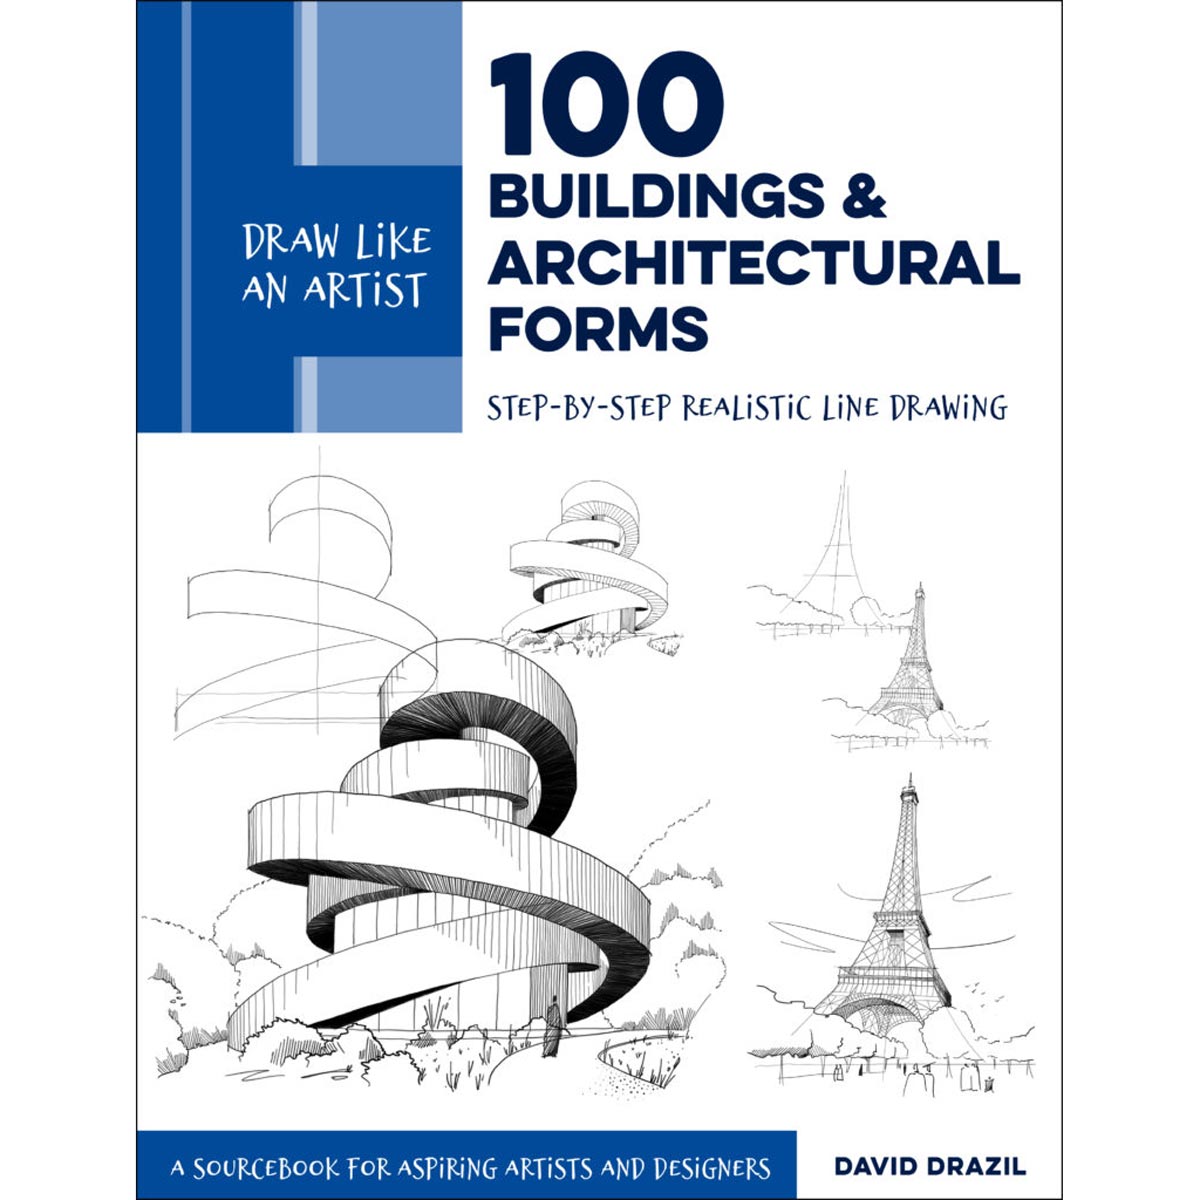 Walter Foster Books - Draw Like an Artist: 100 Buildings and Architectural Forms